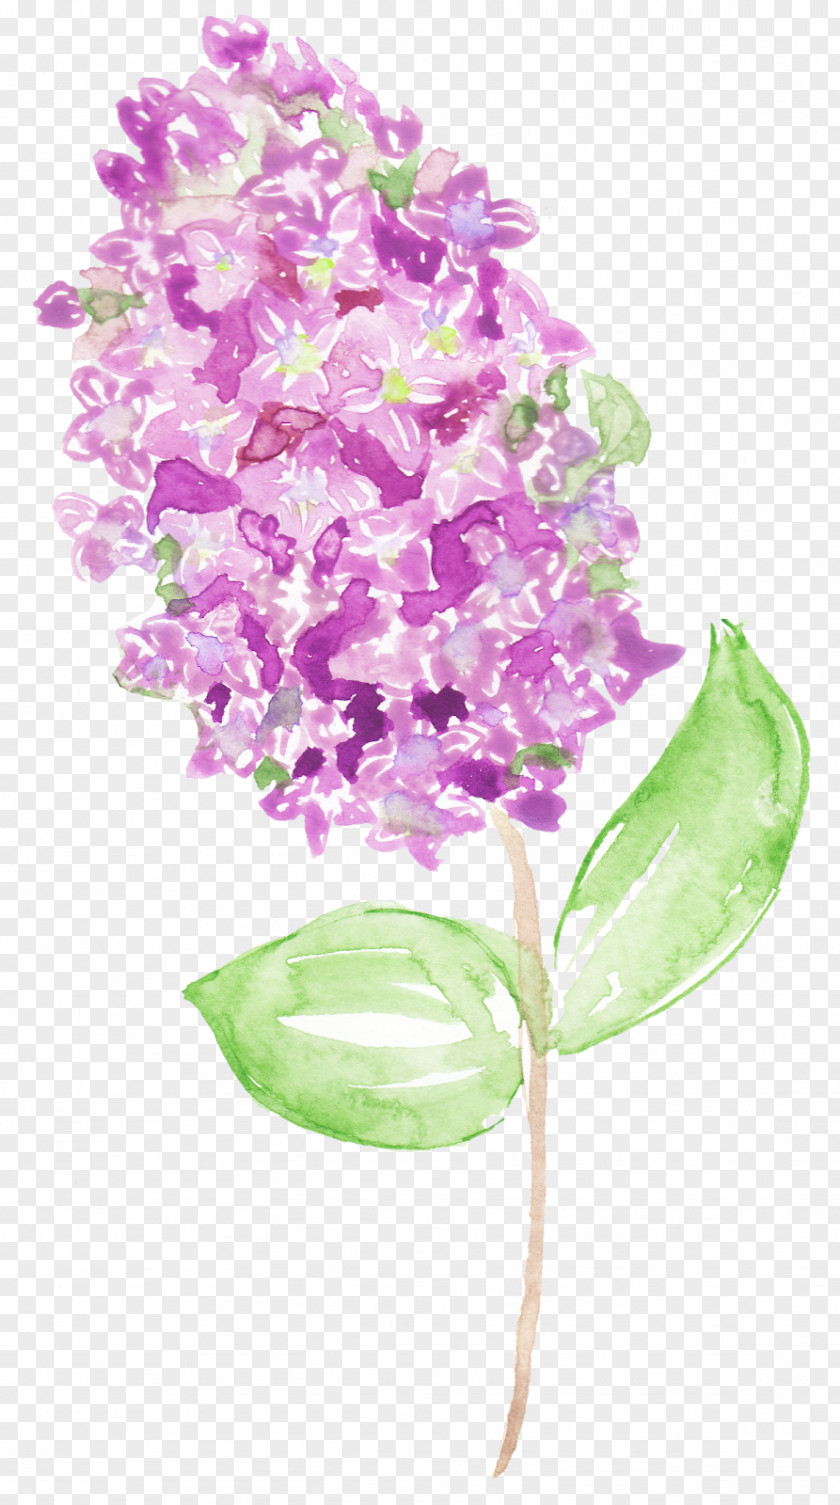 Hydrangea Sclance Watercolor Painting Image Flower Vector Graphics PNG